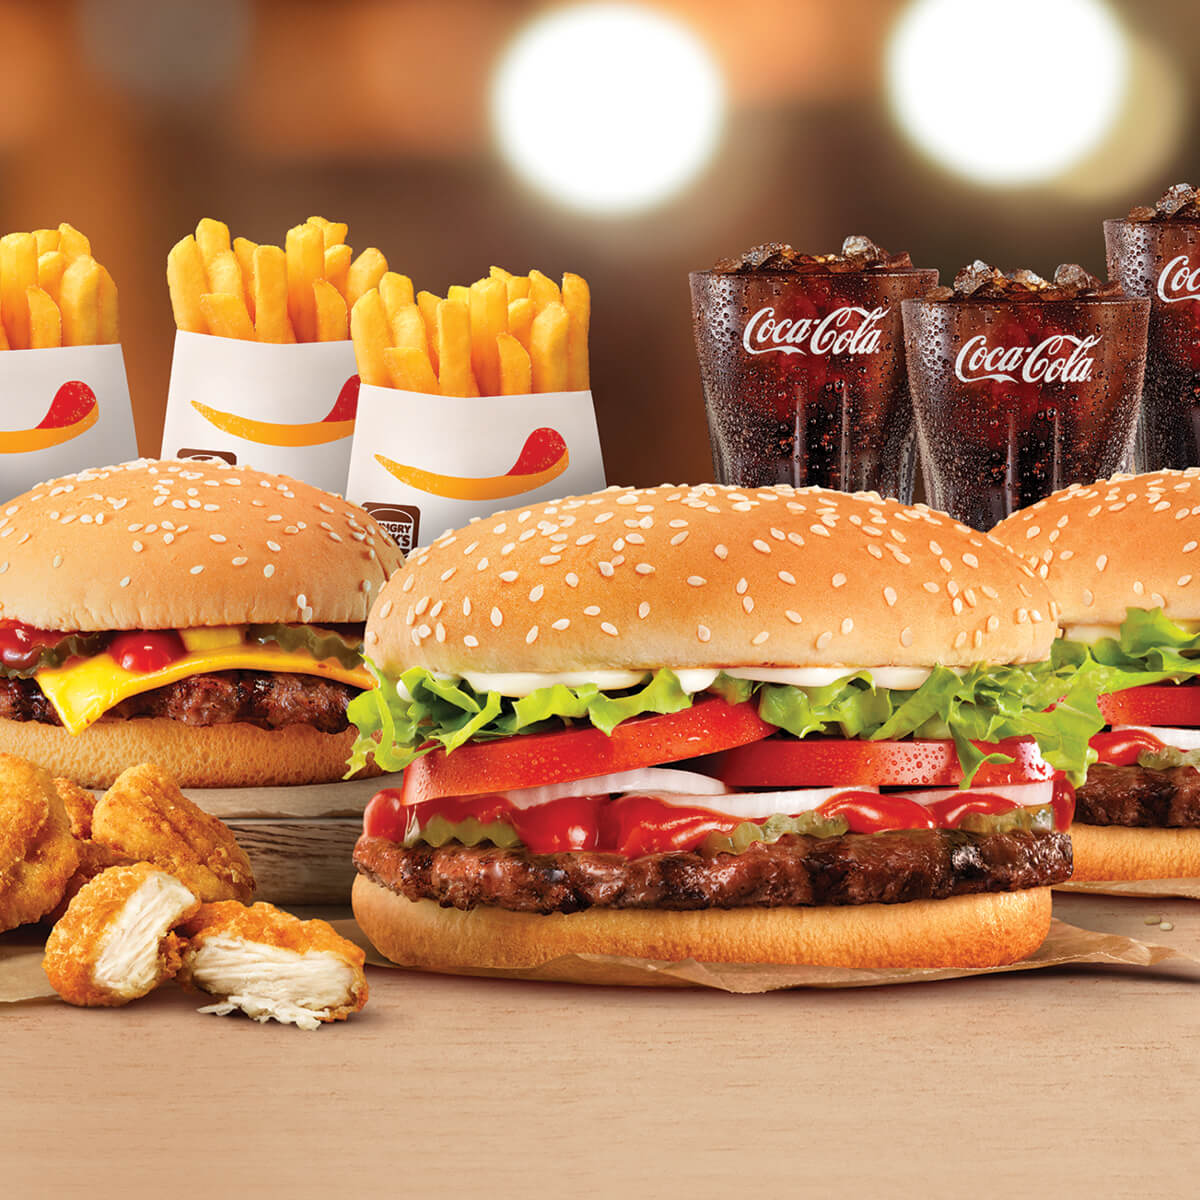 Grab some burgers and fries for you and your family here